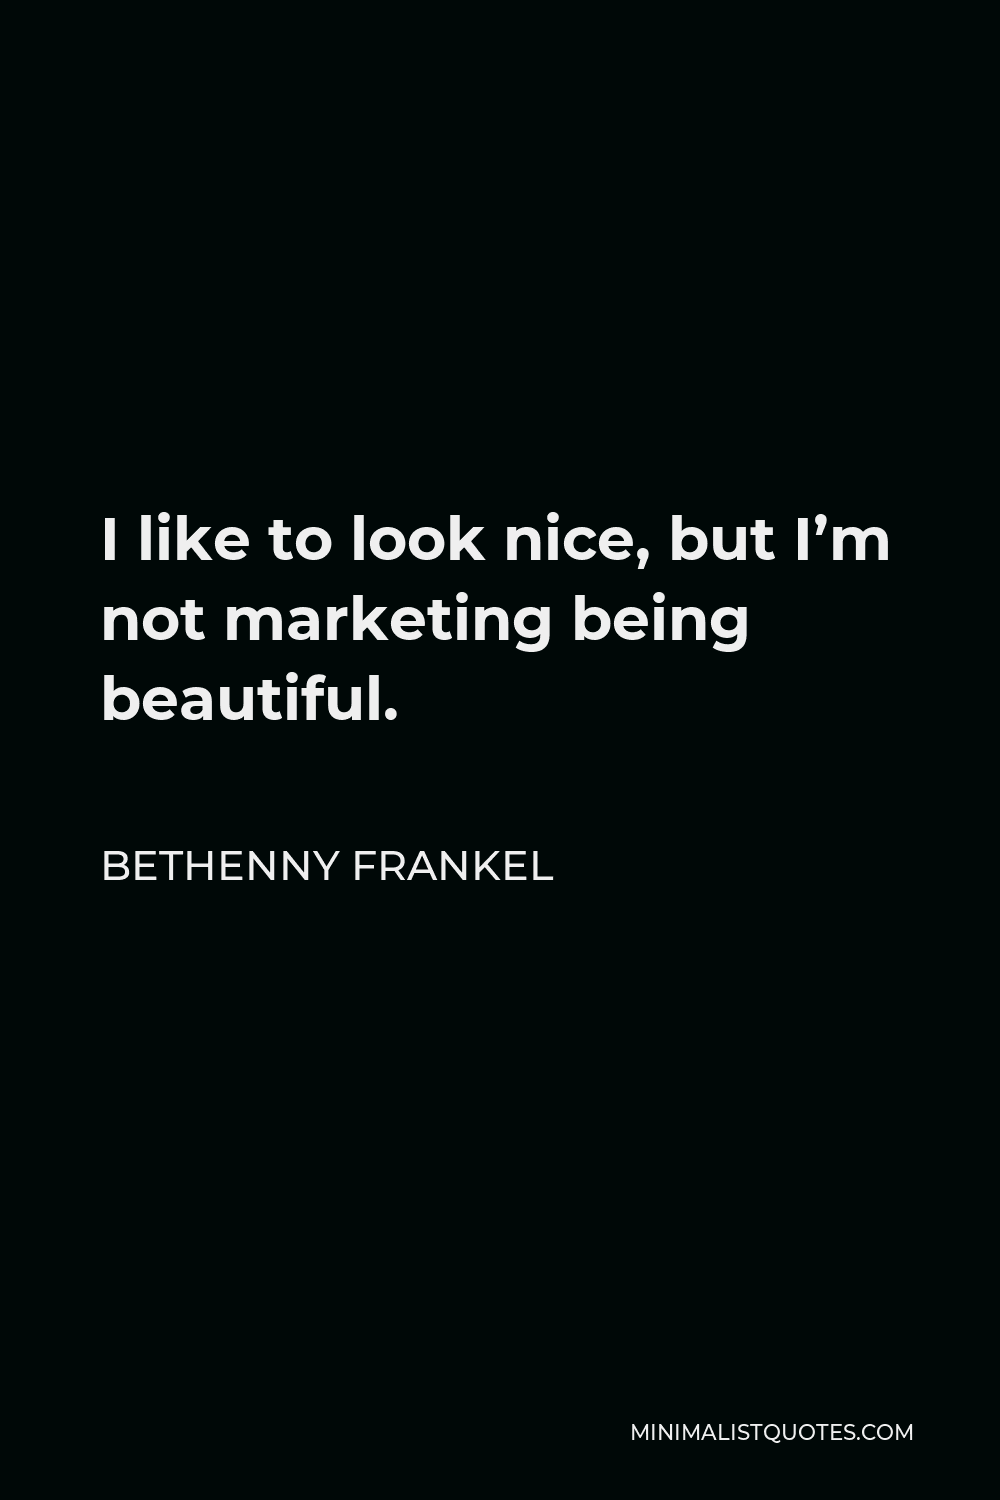 Bethenny Frankel Quote - I like to look nice, but I’m not marketing being beautiful.